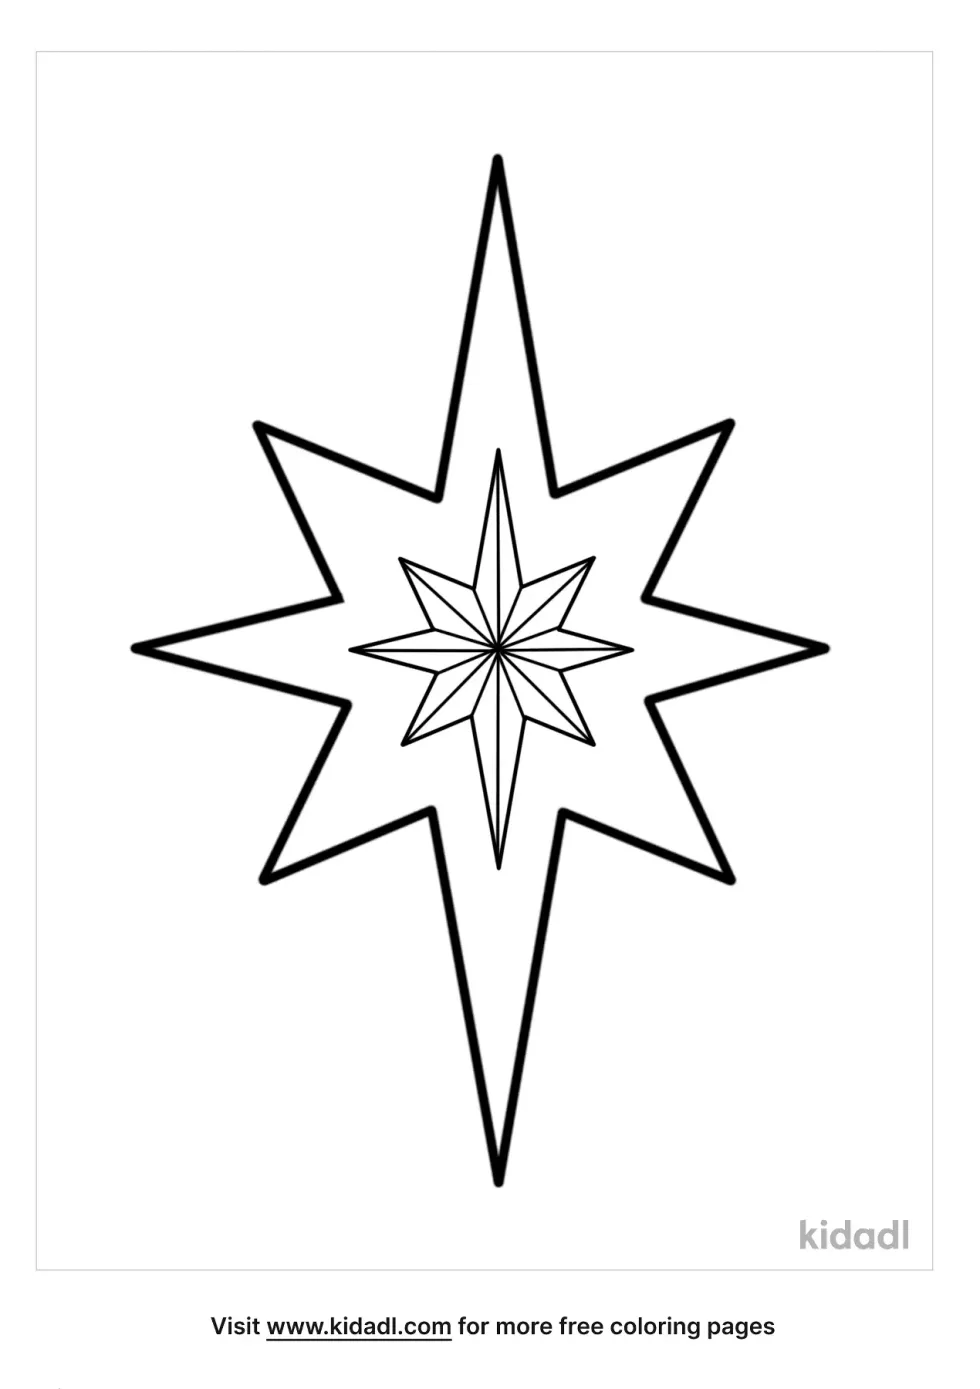 Star Cross Coloring Page